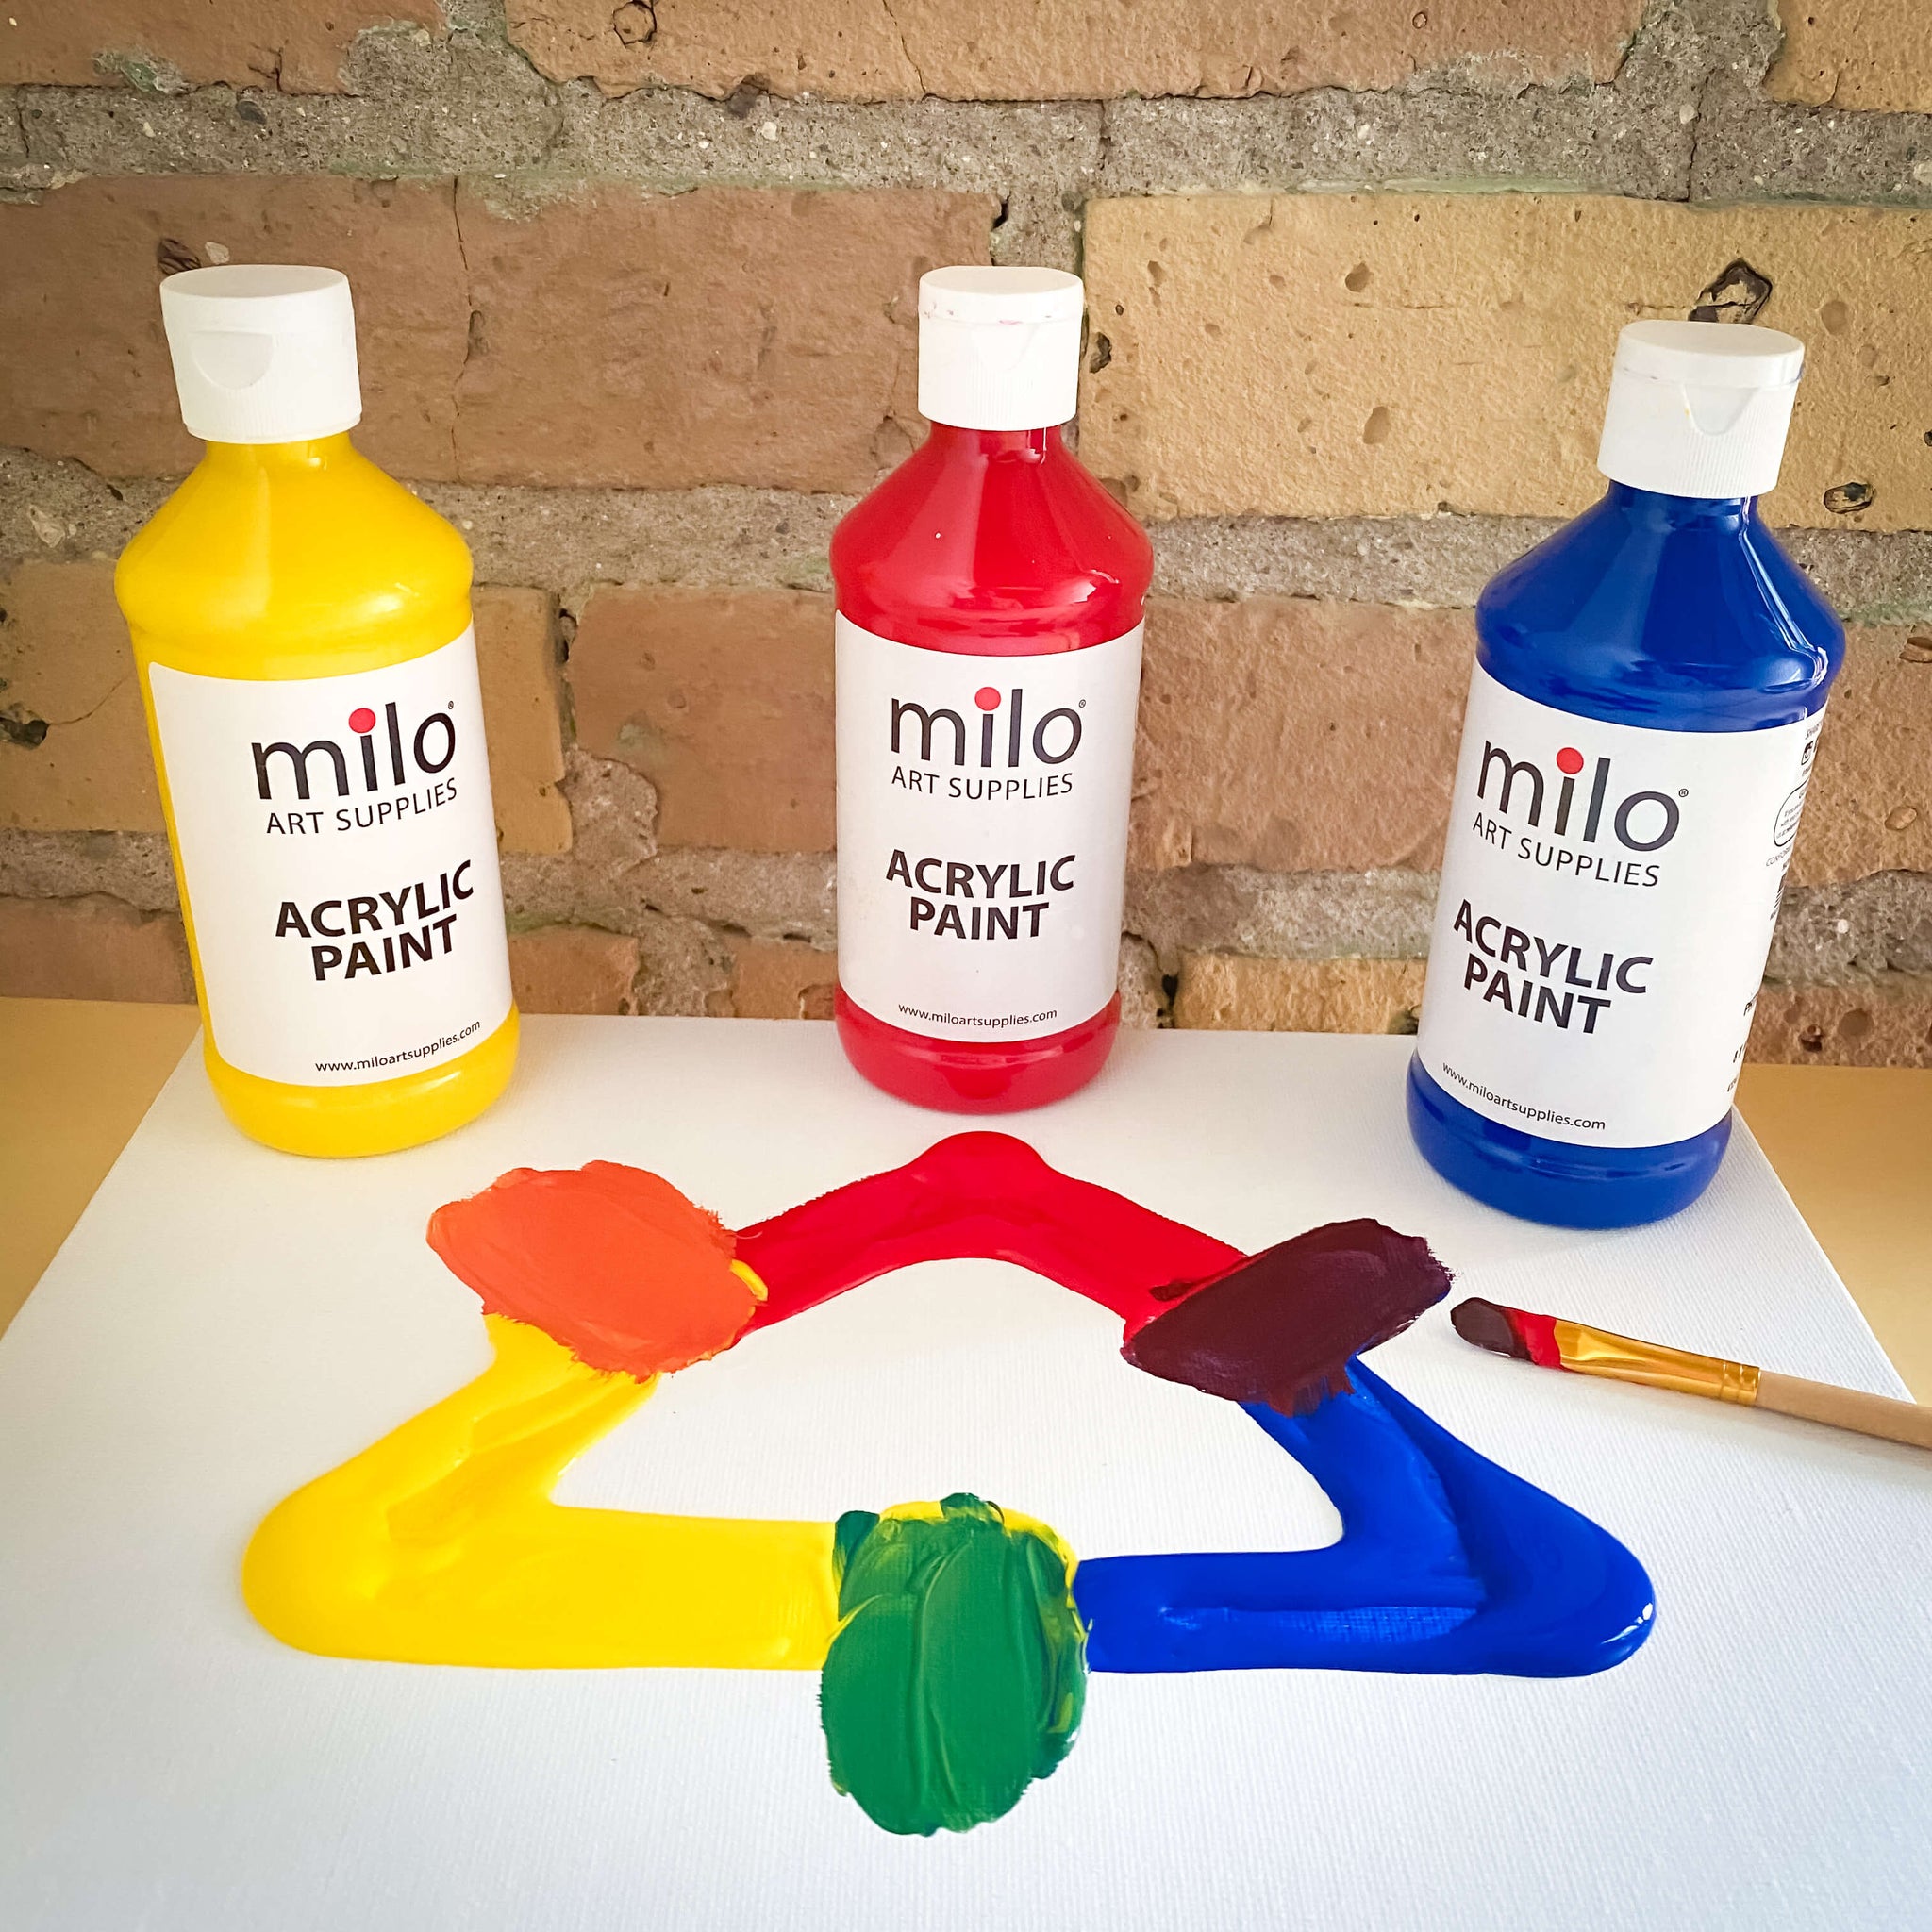 milo Metallic Acrylic Paint Set of 6 Colors, 4 oz Bottles, Made in The USA  850000371910